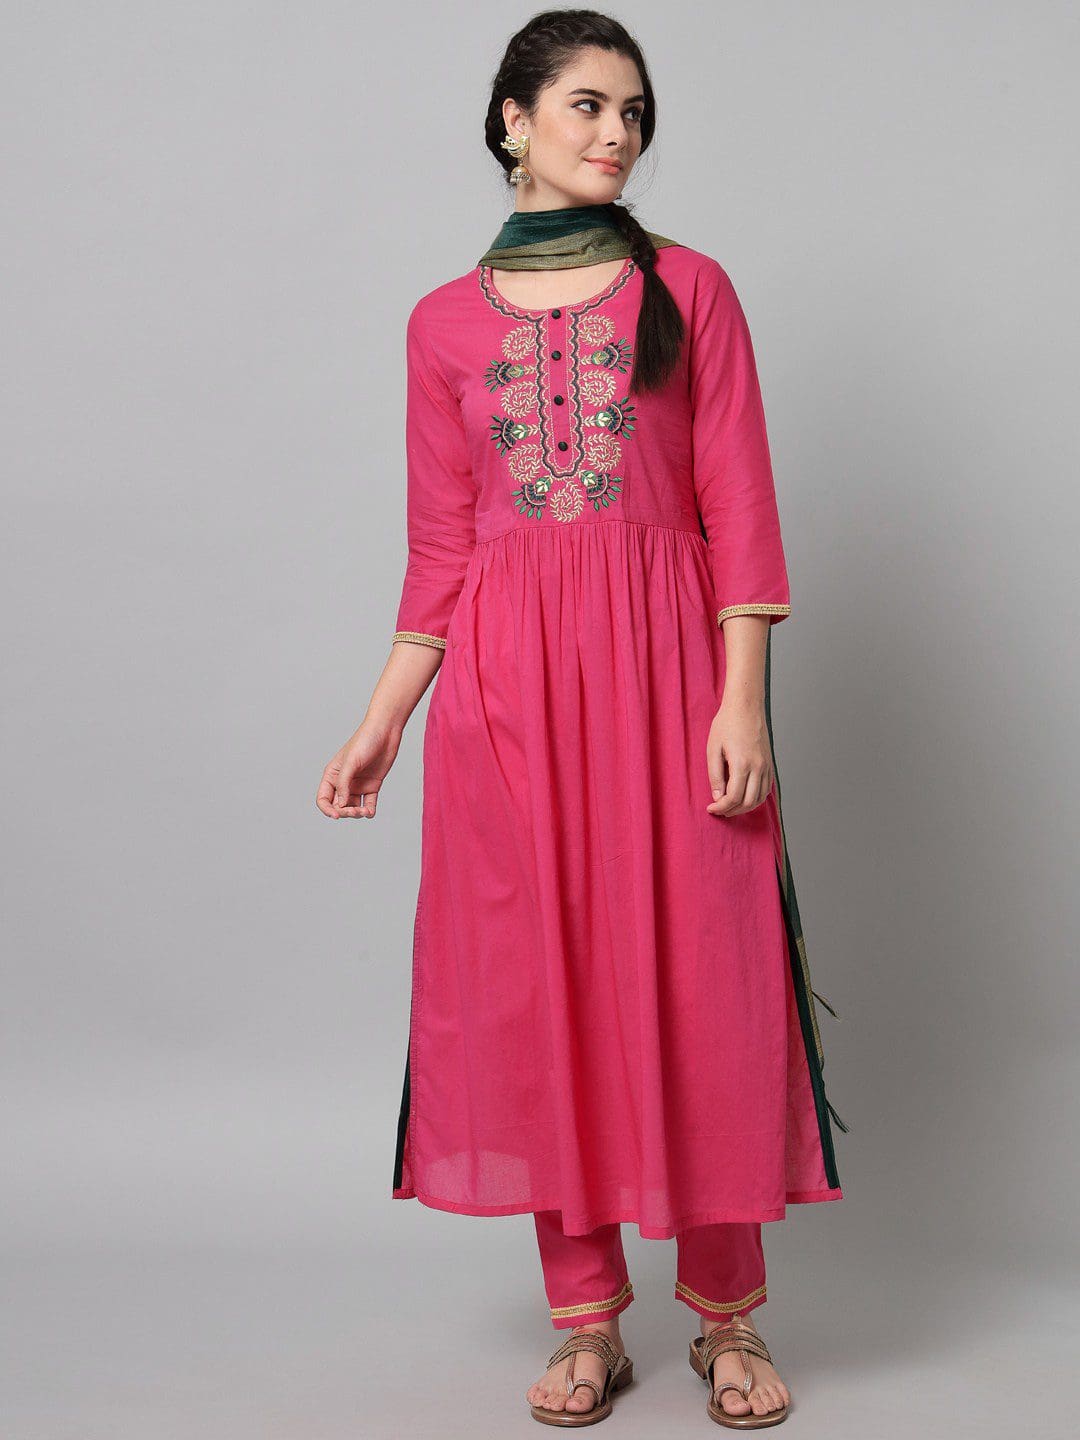 Exclusive Embroidery Pink Colour Kurti With Trouser And Dupatta For Women.